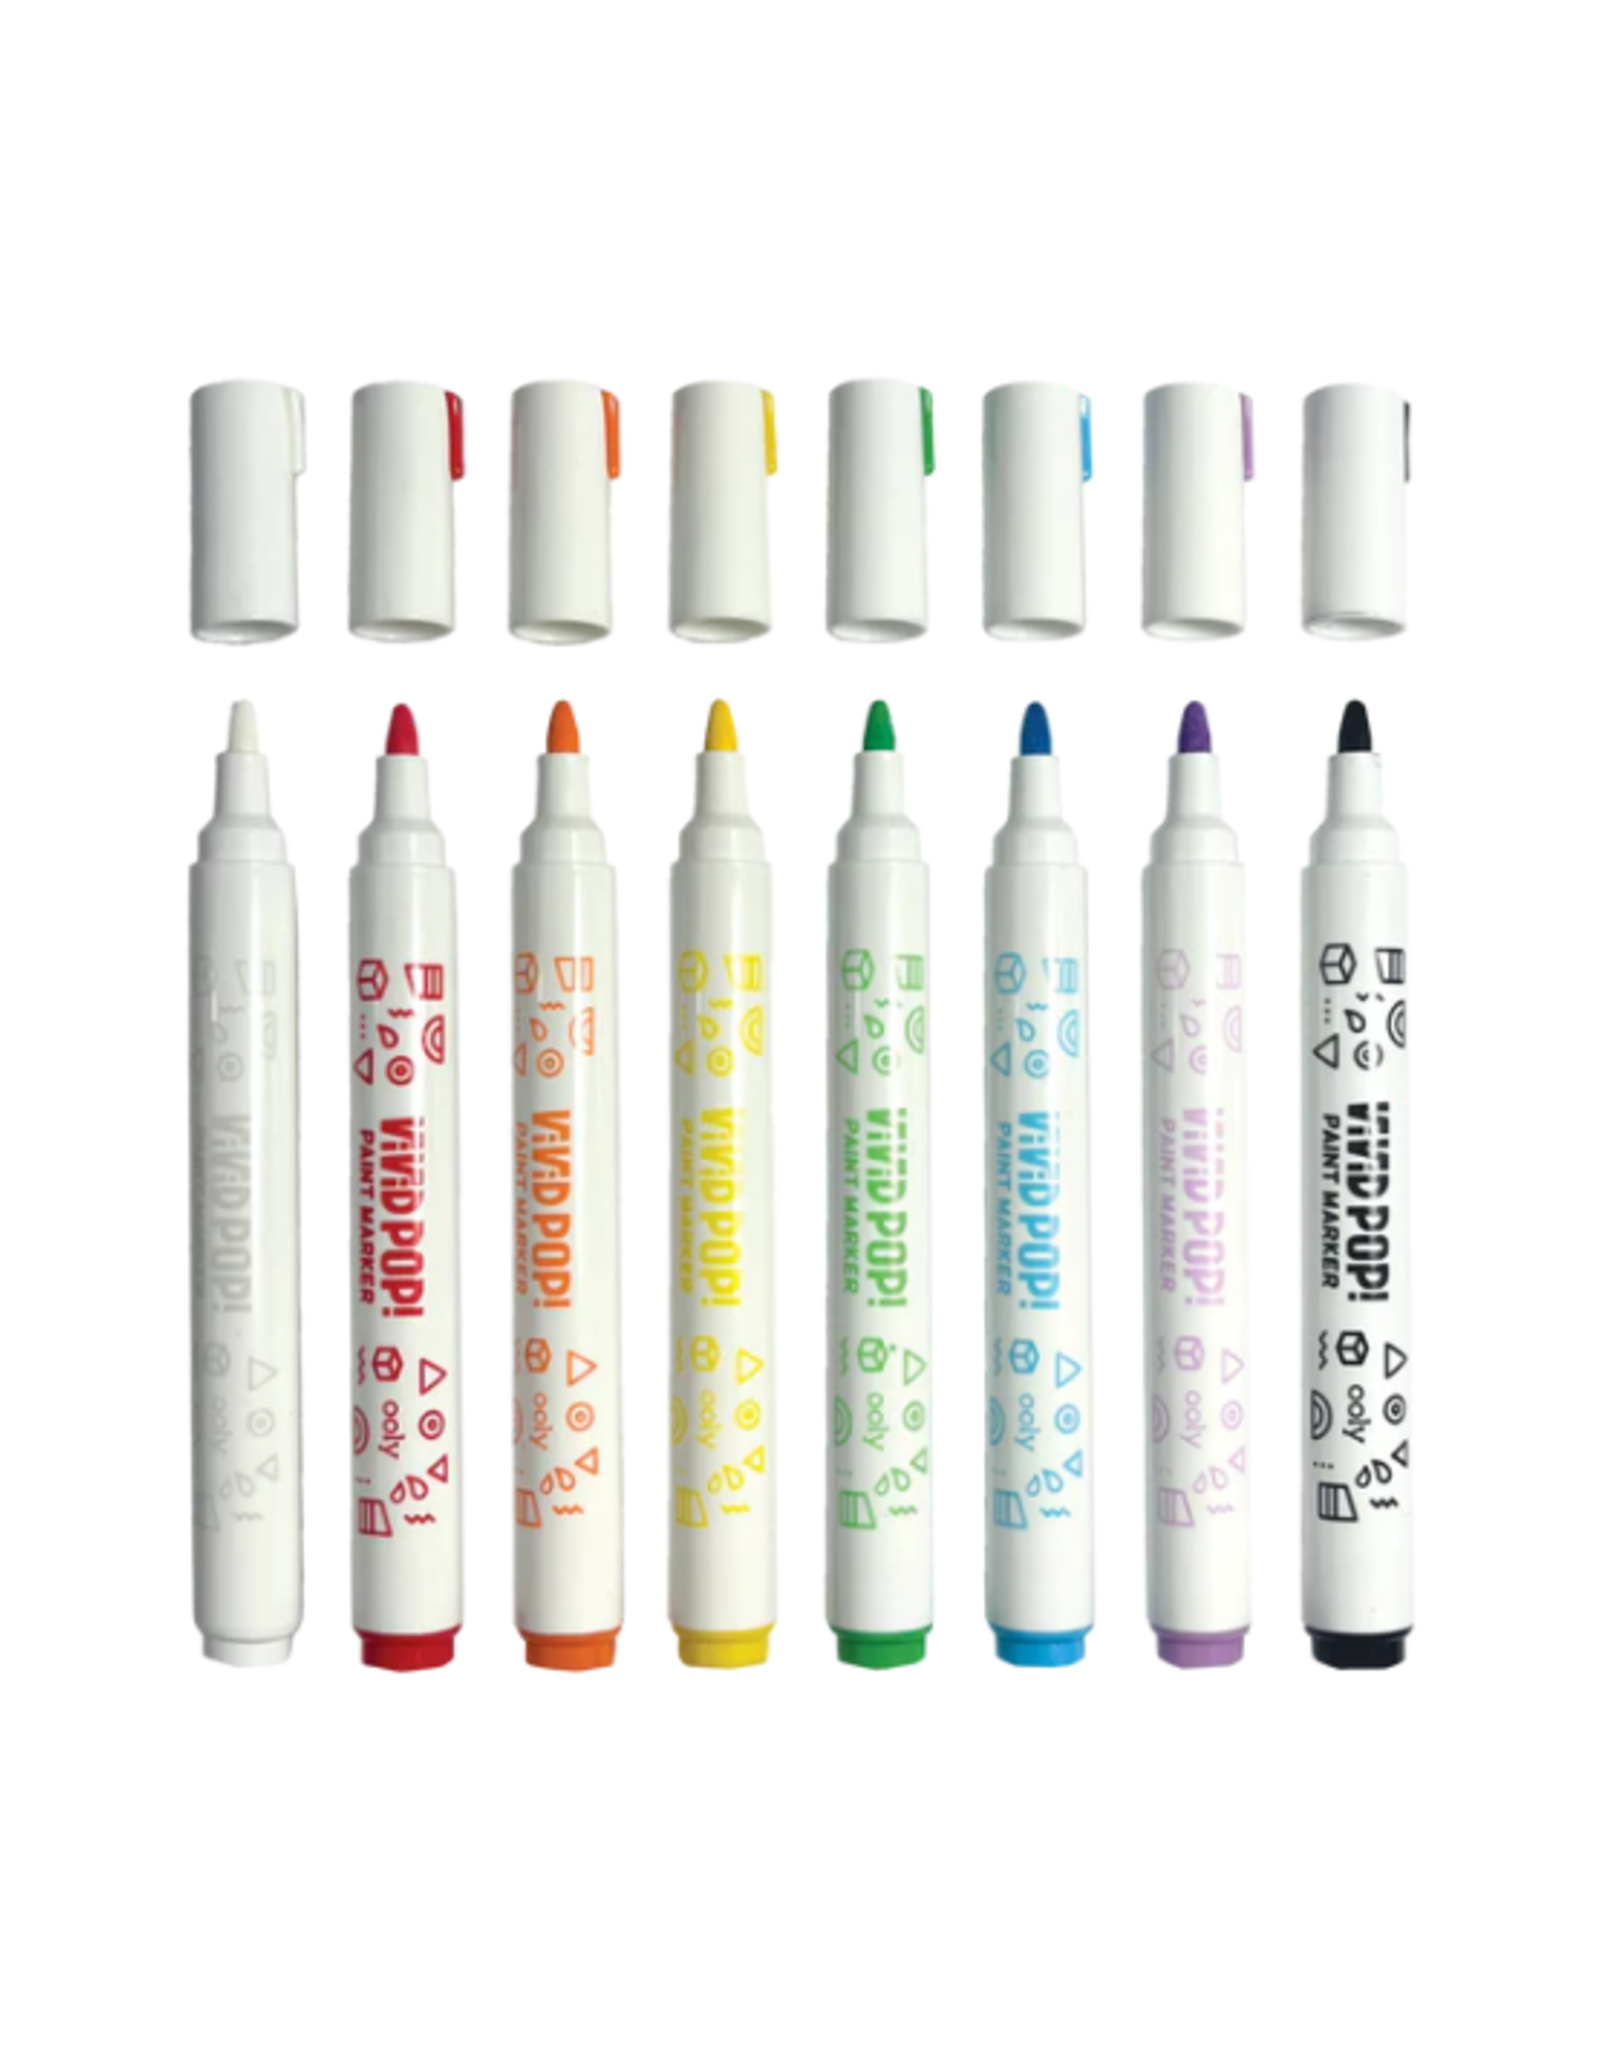 Ooly Ooly - Vivid Pop! Water Based Paint Markers